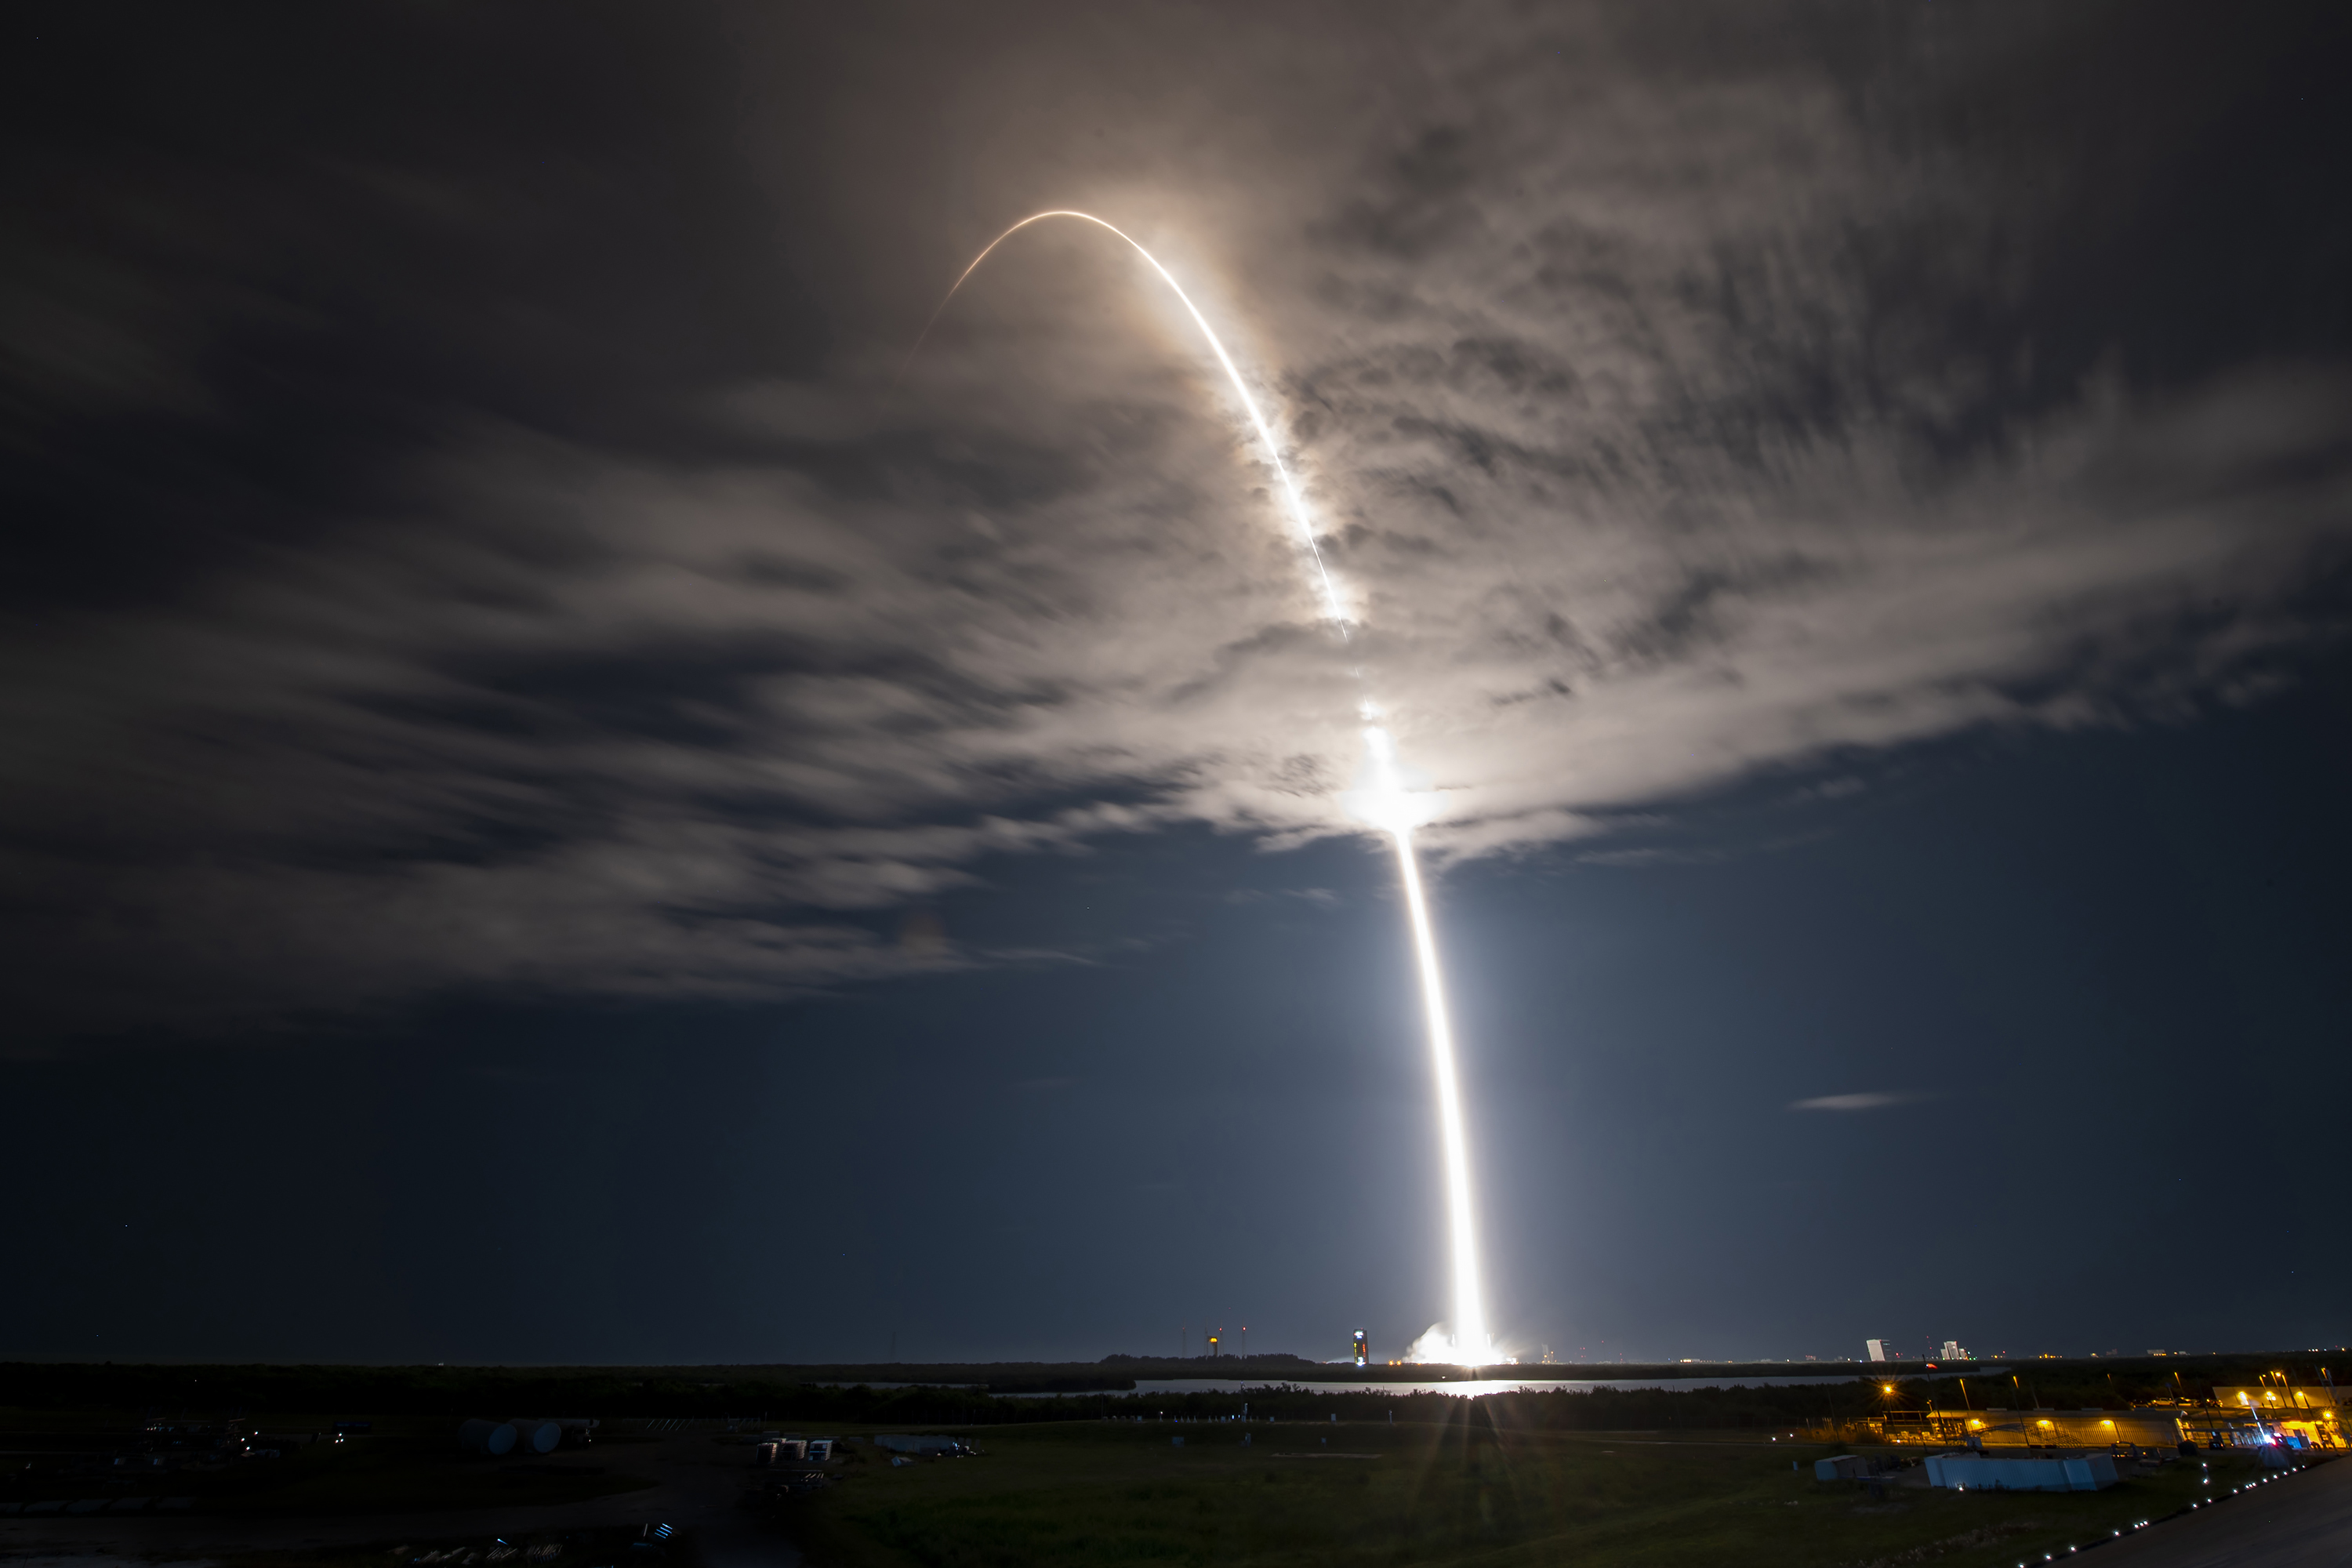 SpaceX: Starlink satellte production now 120 per month